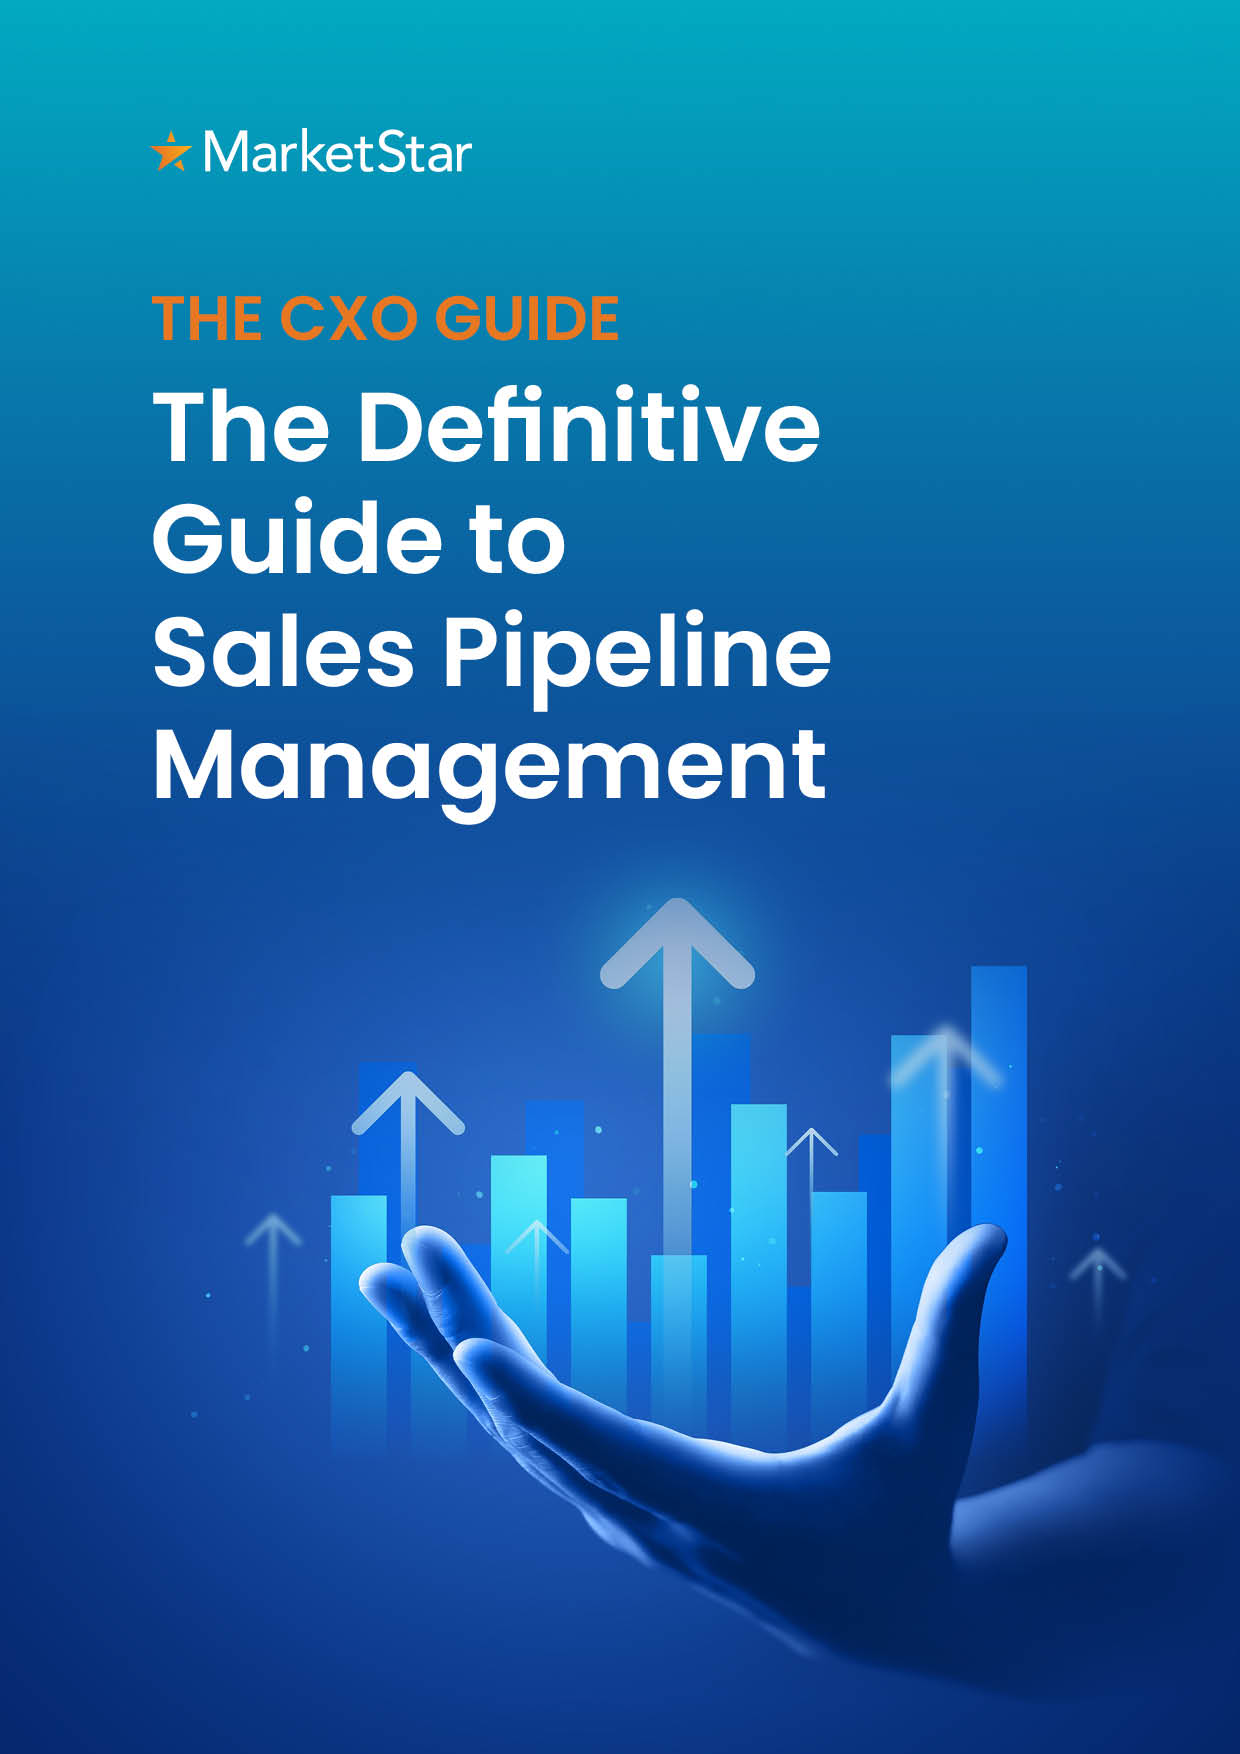 The Definitive Guide to Sales Pipeline Management